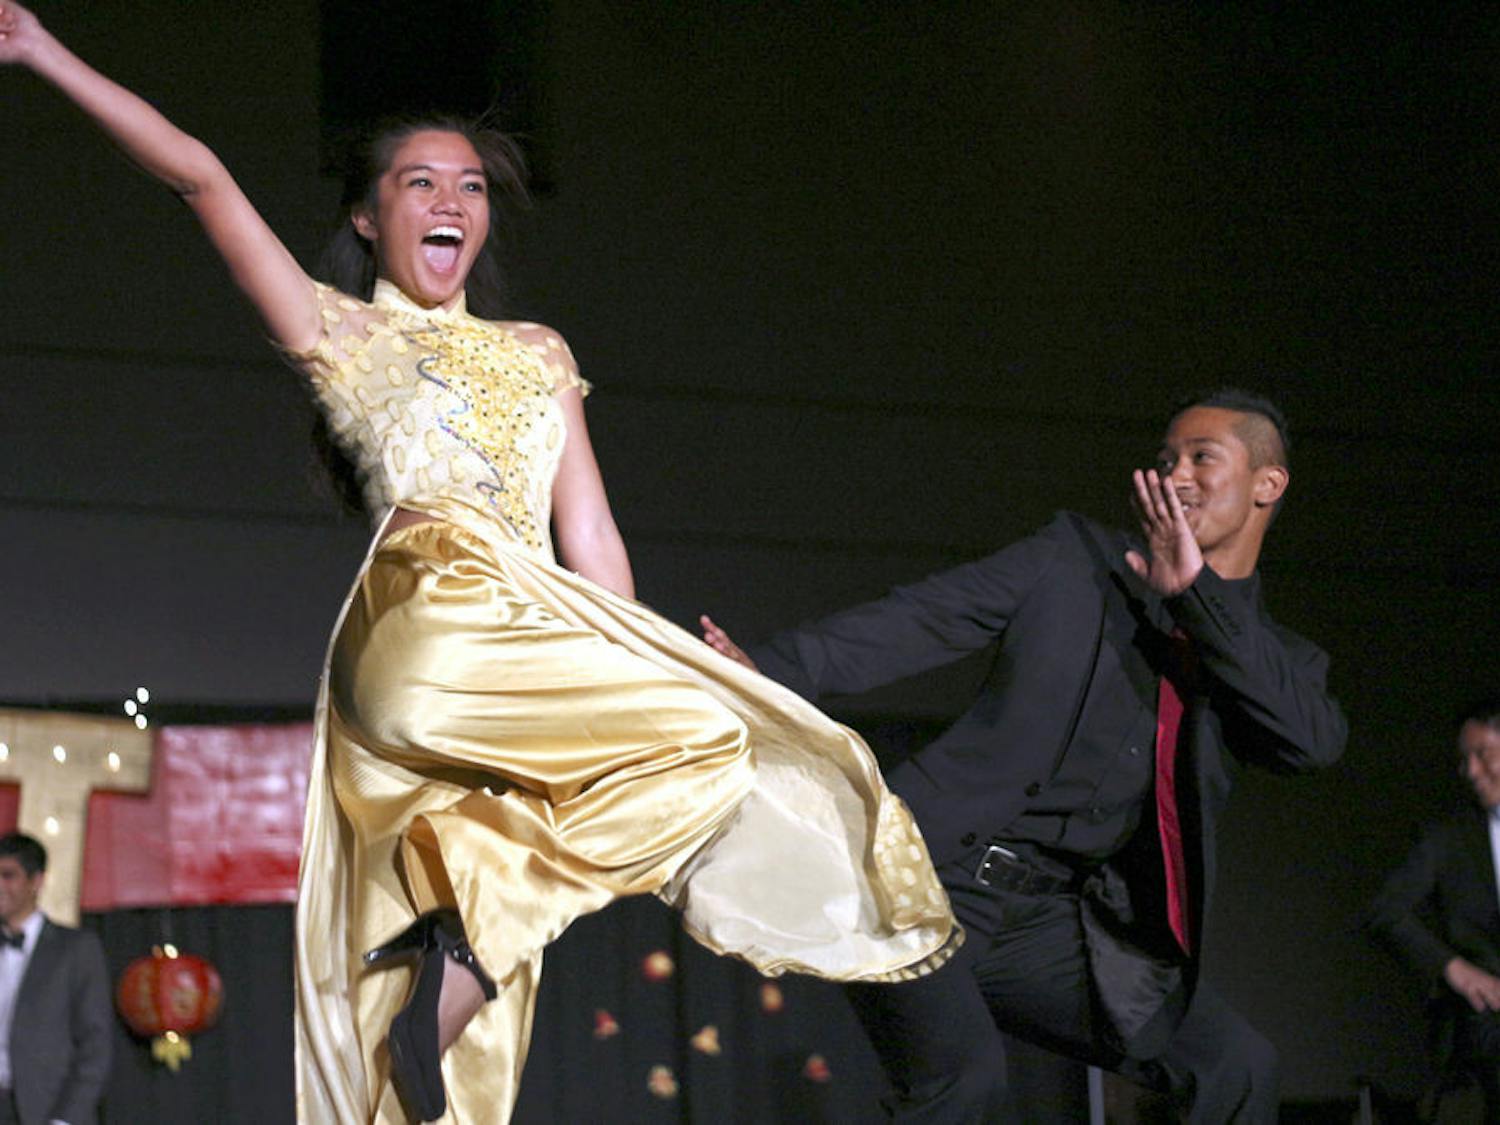 The Vietnamese Student Organization hosted Tet, its 43rd annual Lunar New Year celebration, on Sunday. The theme of the event, which took place in the Reitz Union Grand Ballroom, was “A New Age.” It included games and chances to win raffle tickets before the show and during intermission, as well as performances by singers, dancers and martial artists. 